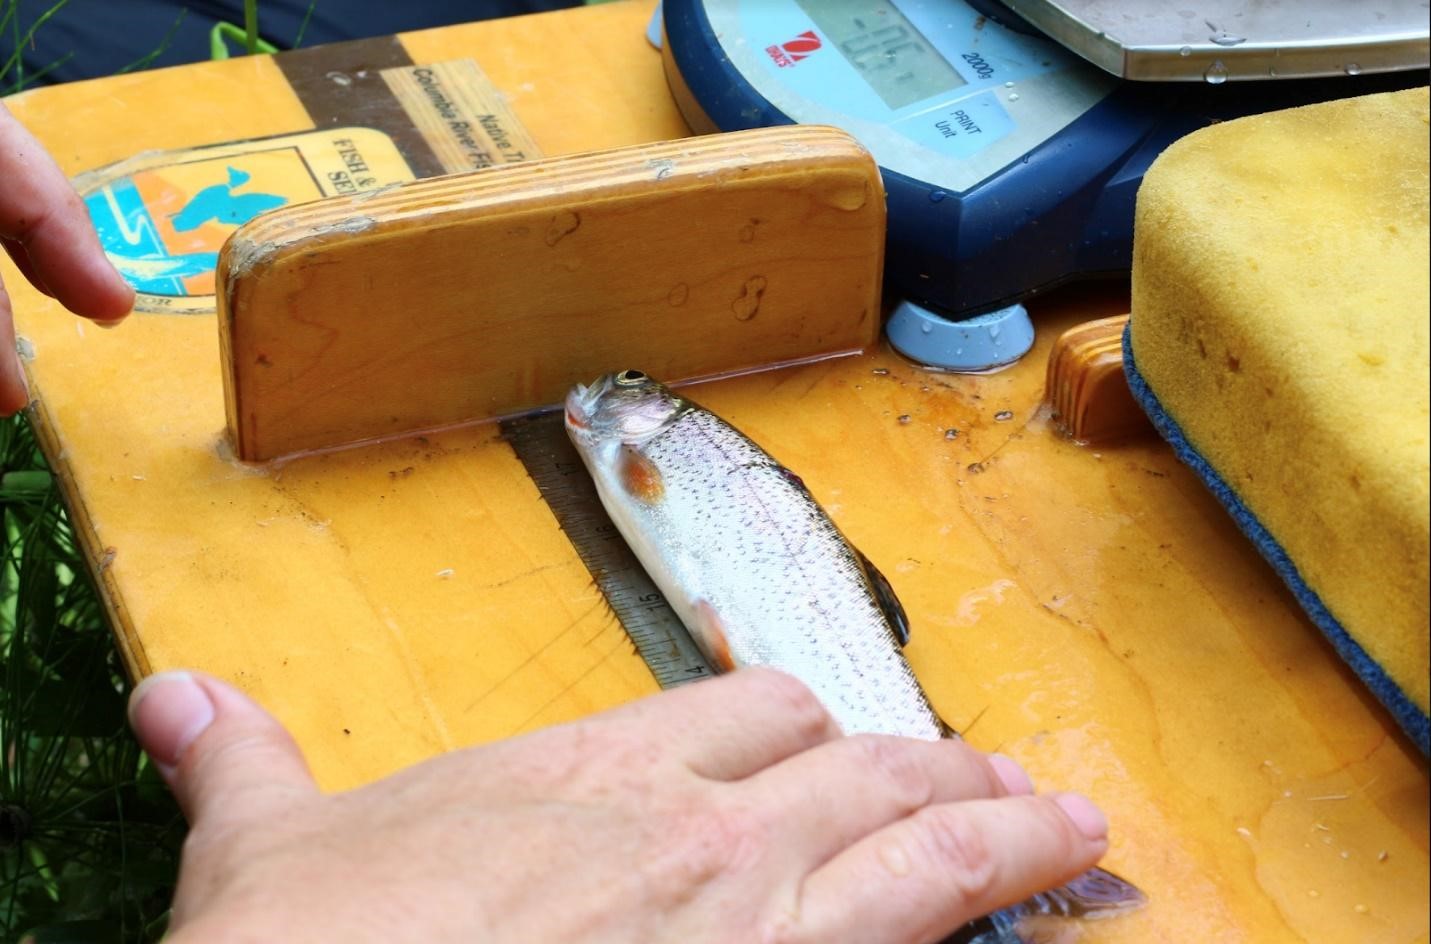 Cutthroat Trout with beautiful orange maxillary about to receive a PIT tag for monitoring.